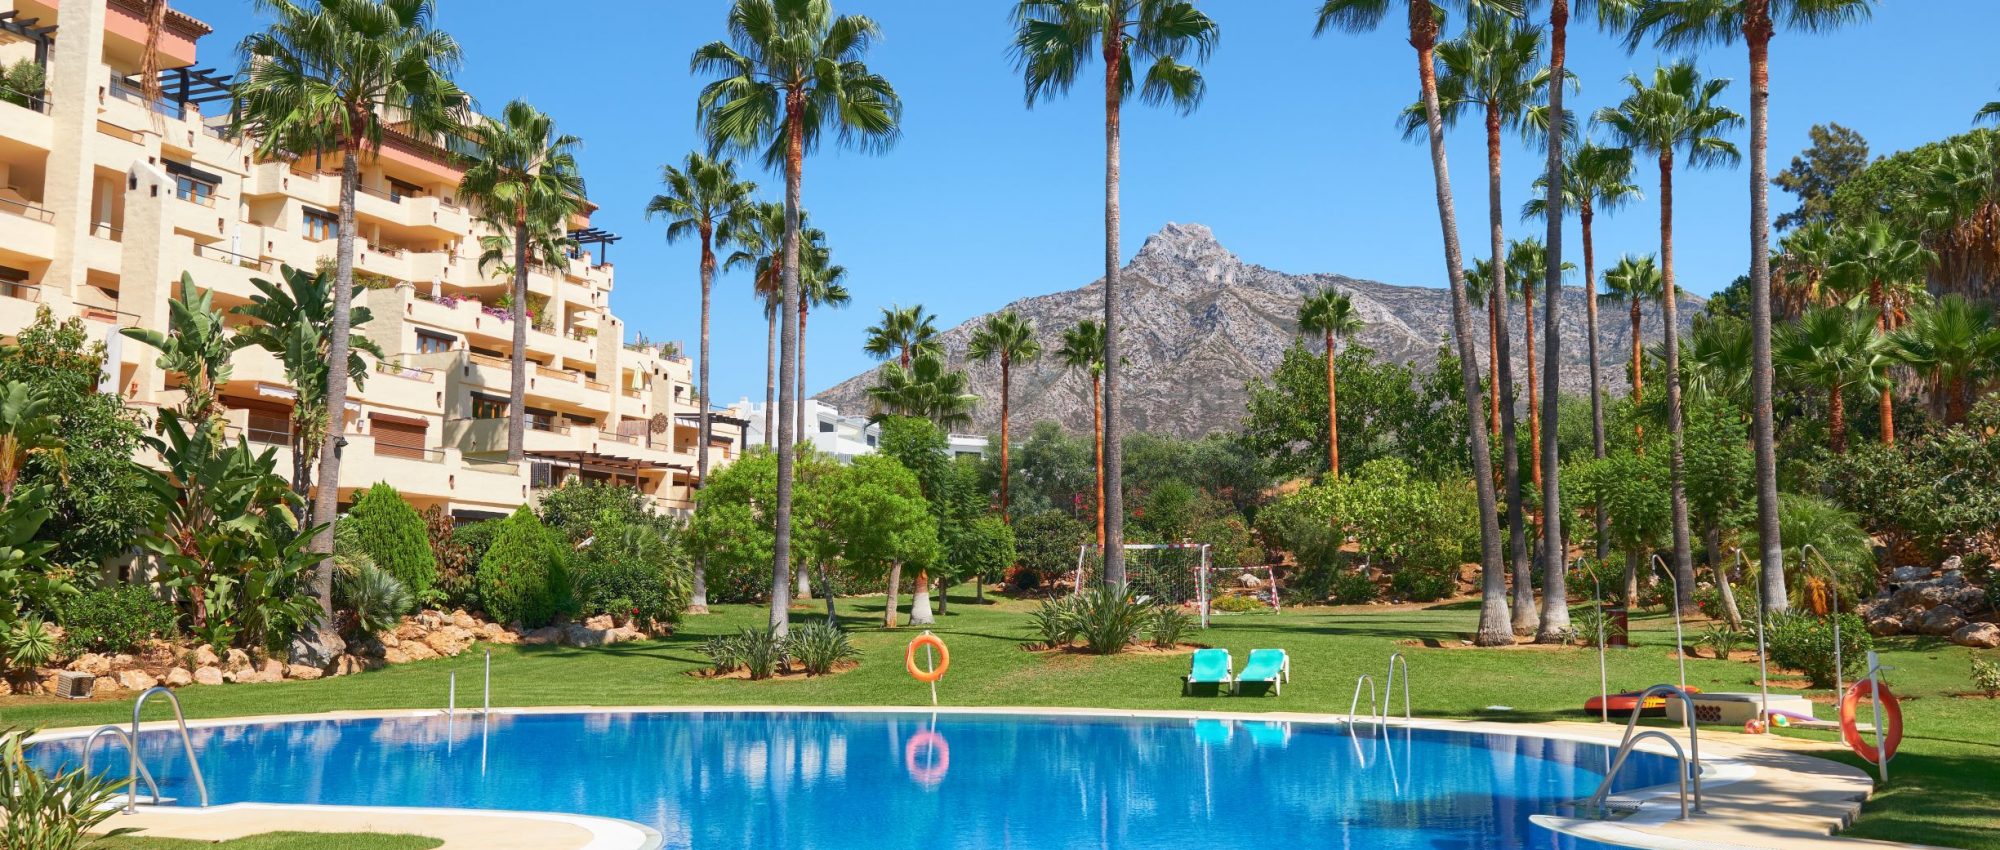 Spacious duplex penthouse on the Golden Mile in Marbella